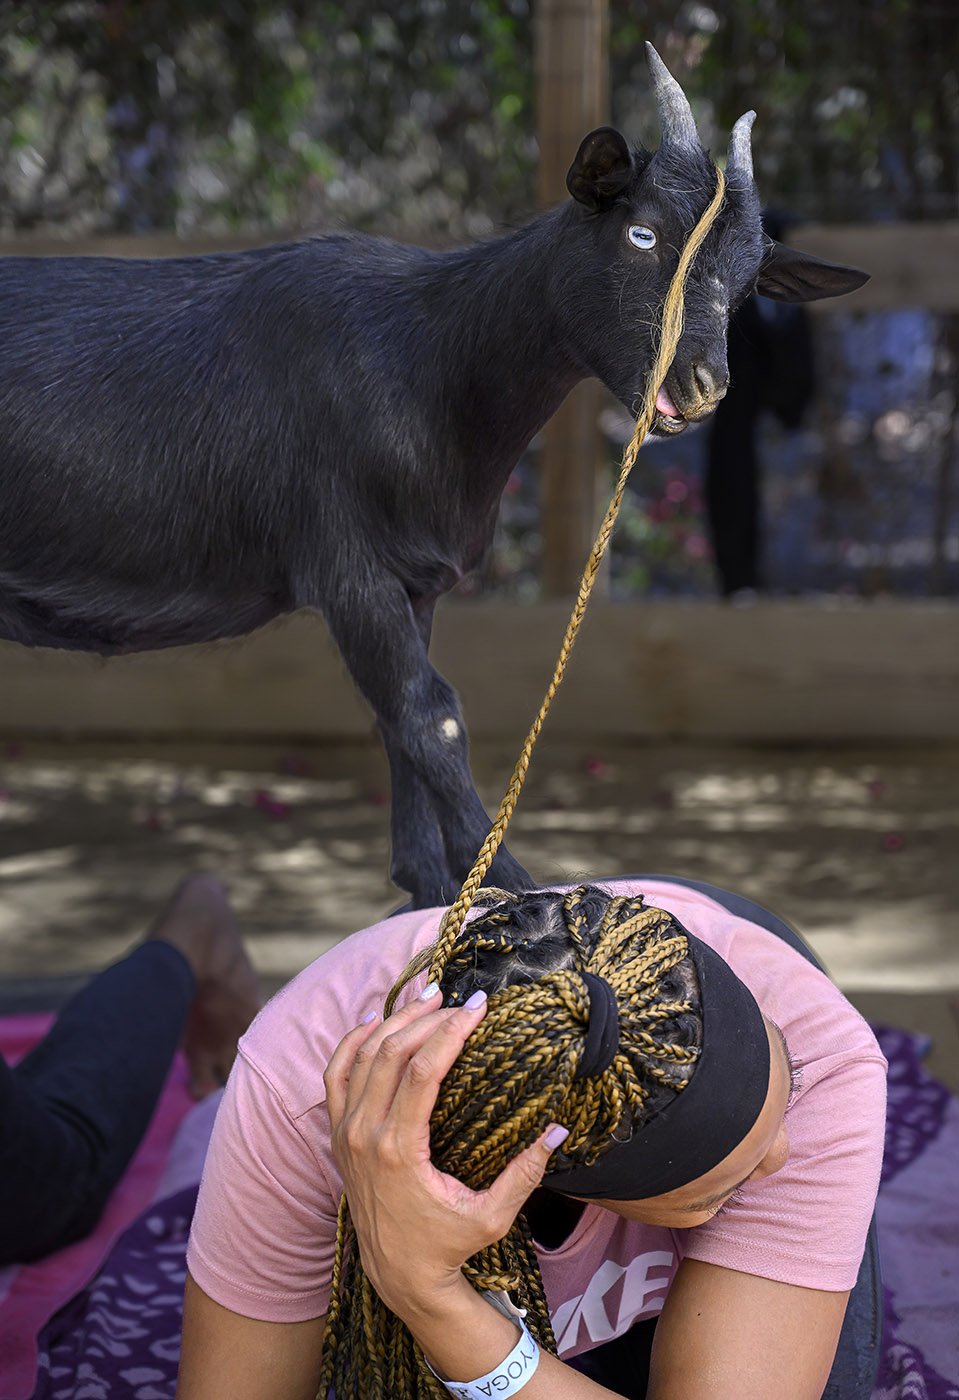  Vanesa Gouldburn tries to prevent her hair from becoming goat food during a yoga class at Goods and Goats in San Juan Capistrano on Sunday, August 28, 2022.  